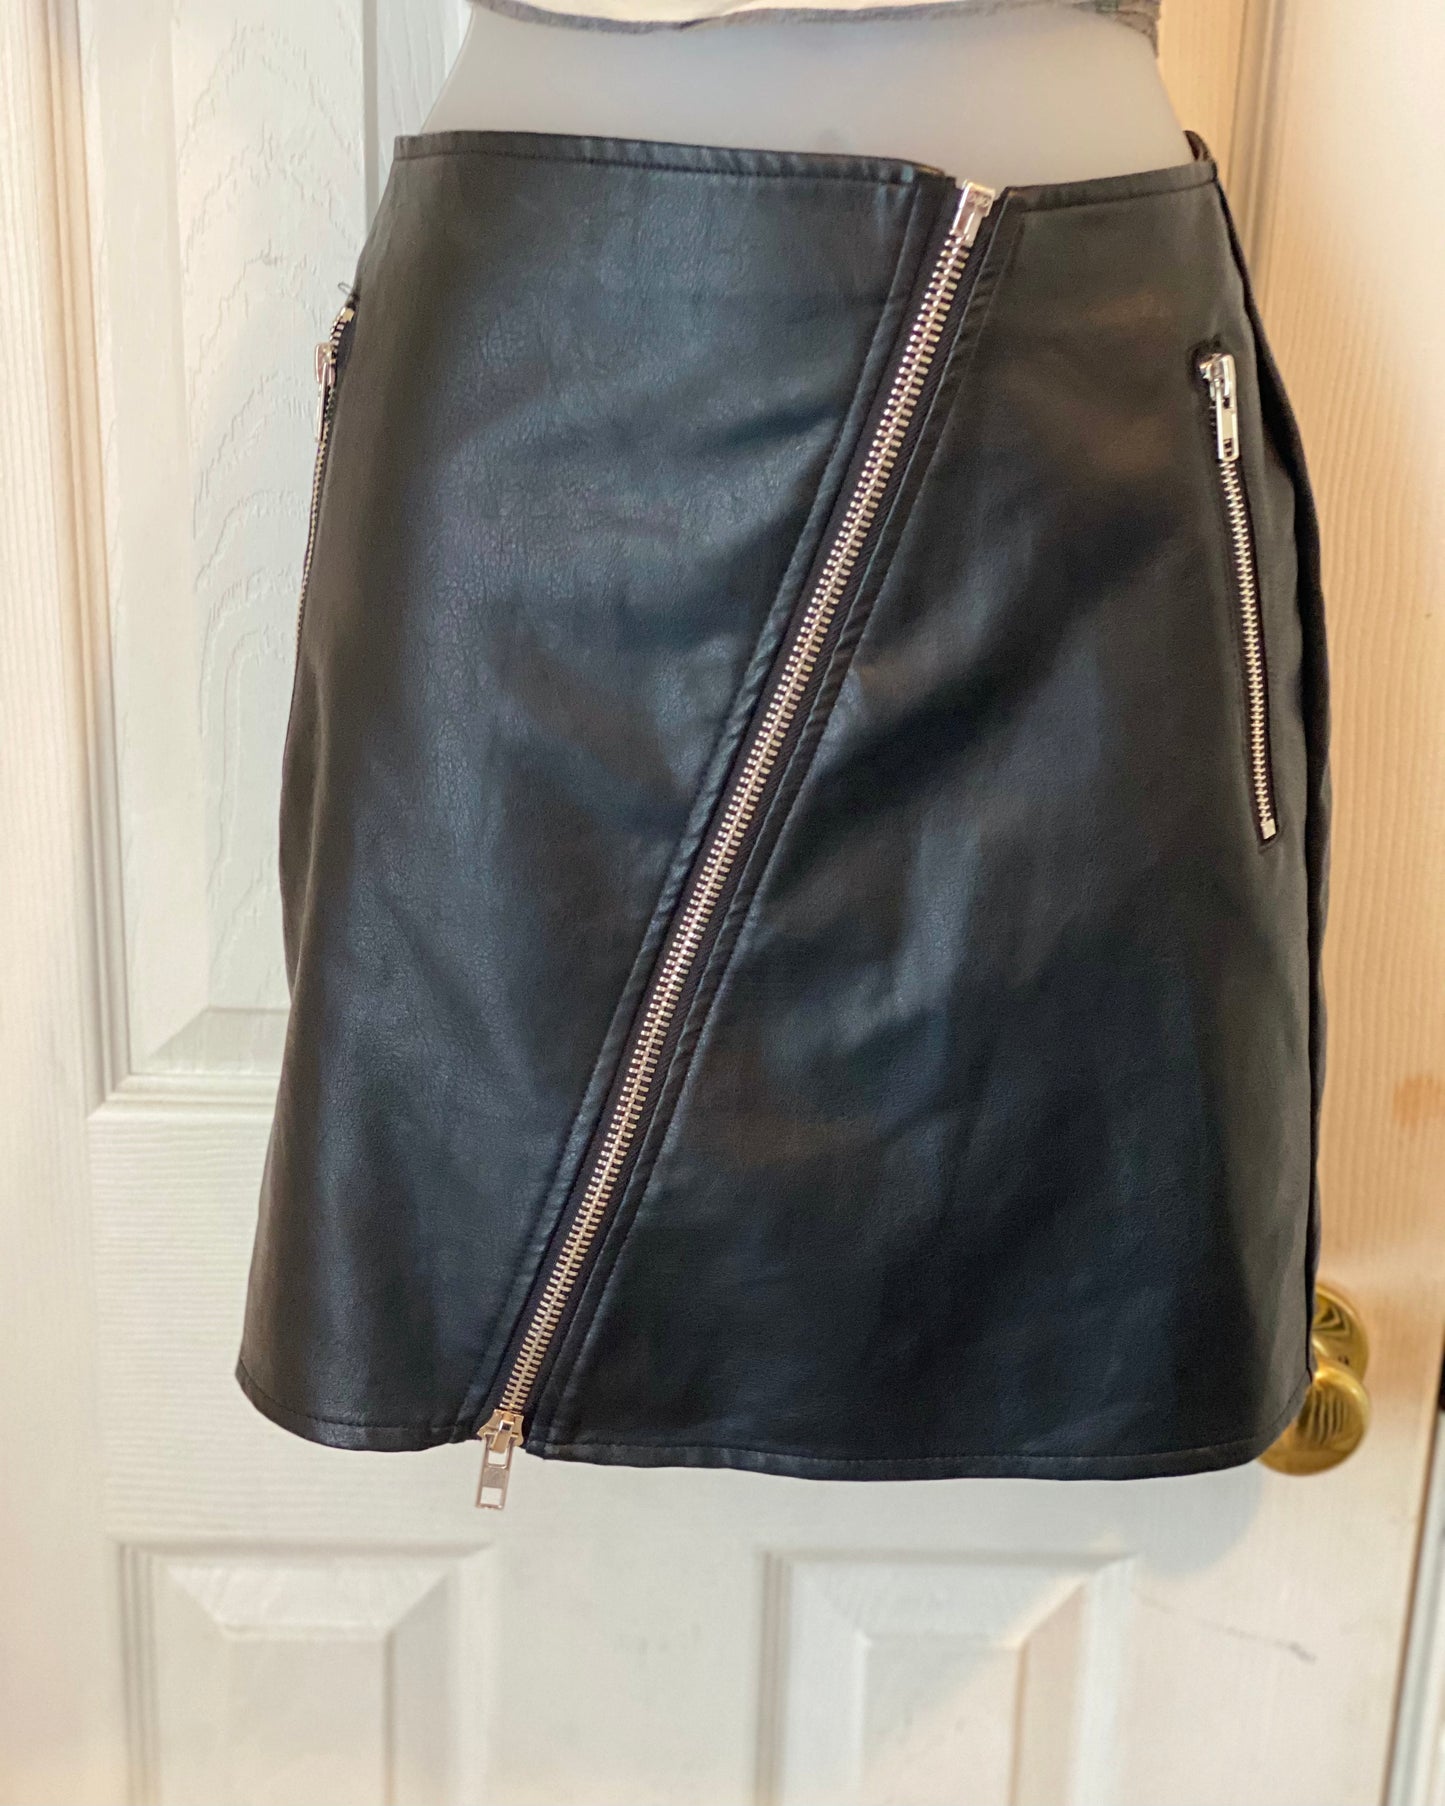 Faux leather zip up skirt